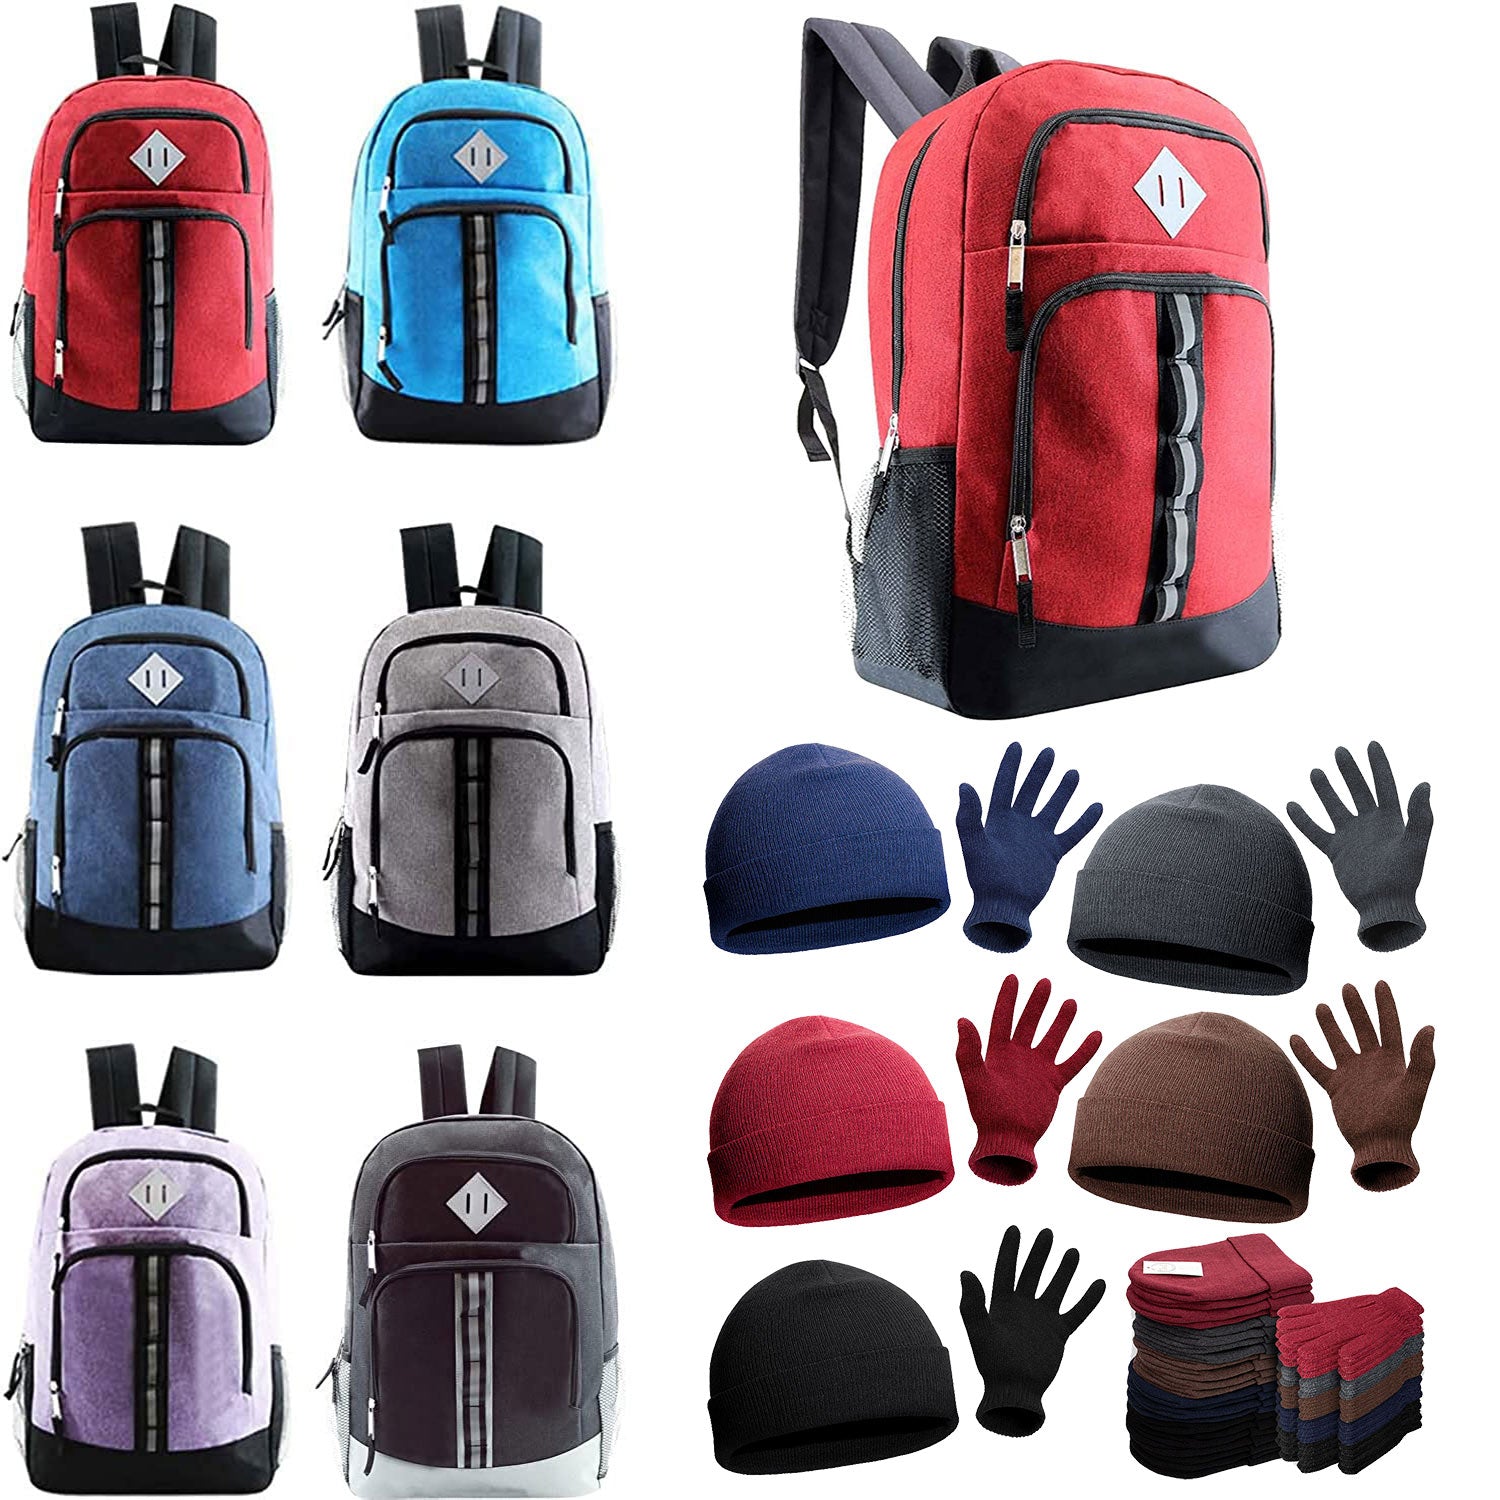 Bulk Case of 12 18" Backpacks and 12 Winter Item Sets - Wholesale Care Package - Emergencies, Homeless, Charity